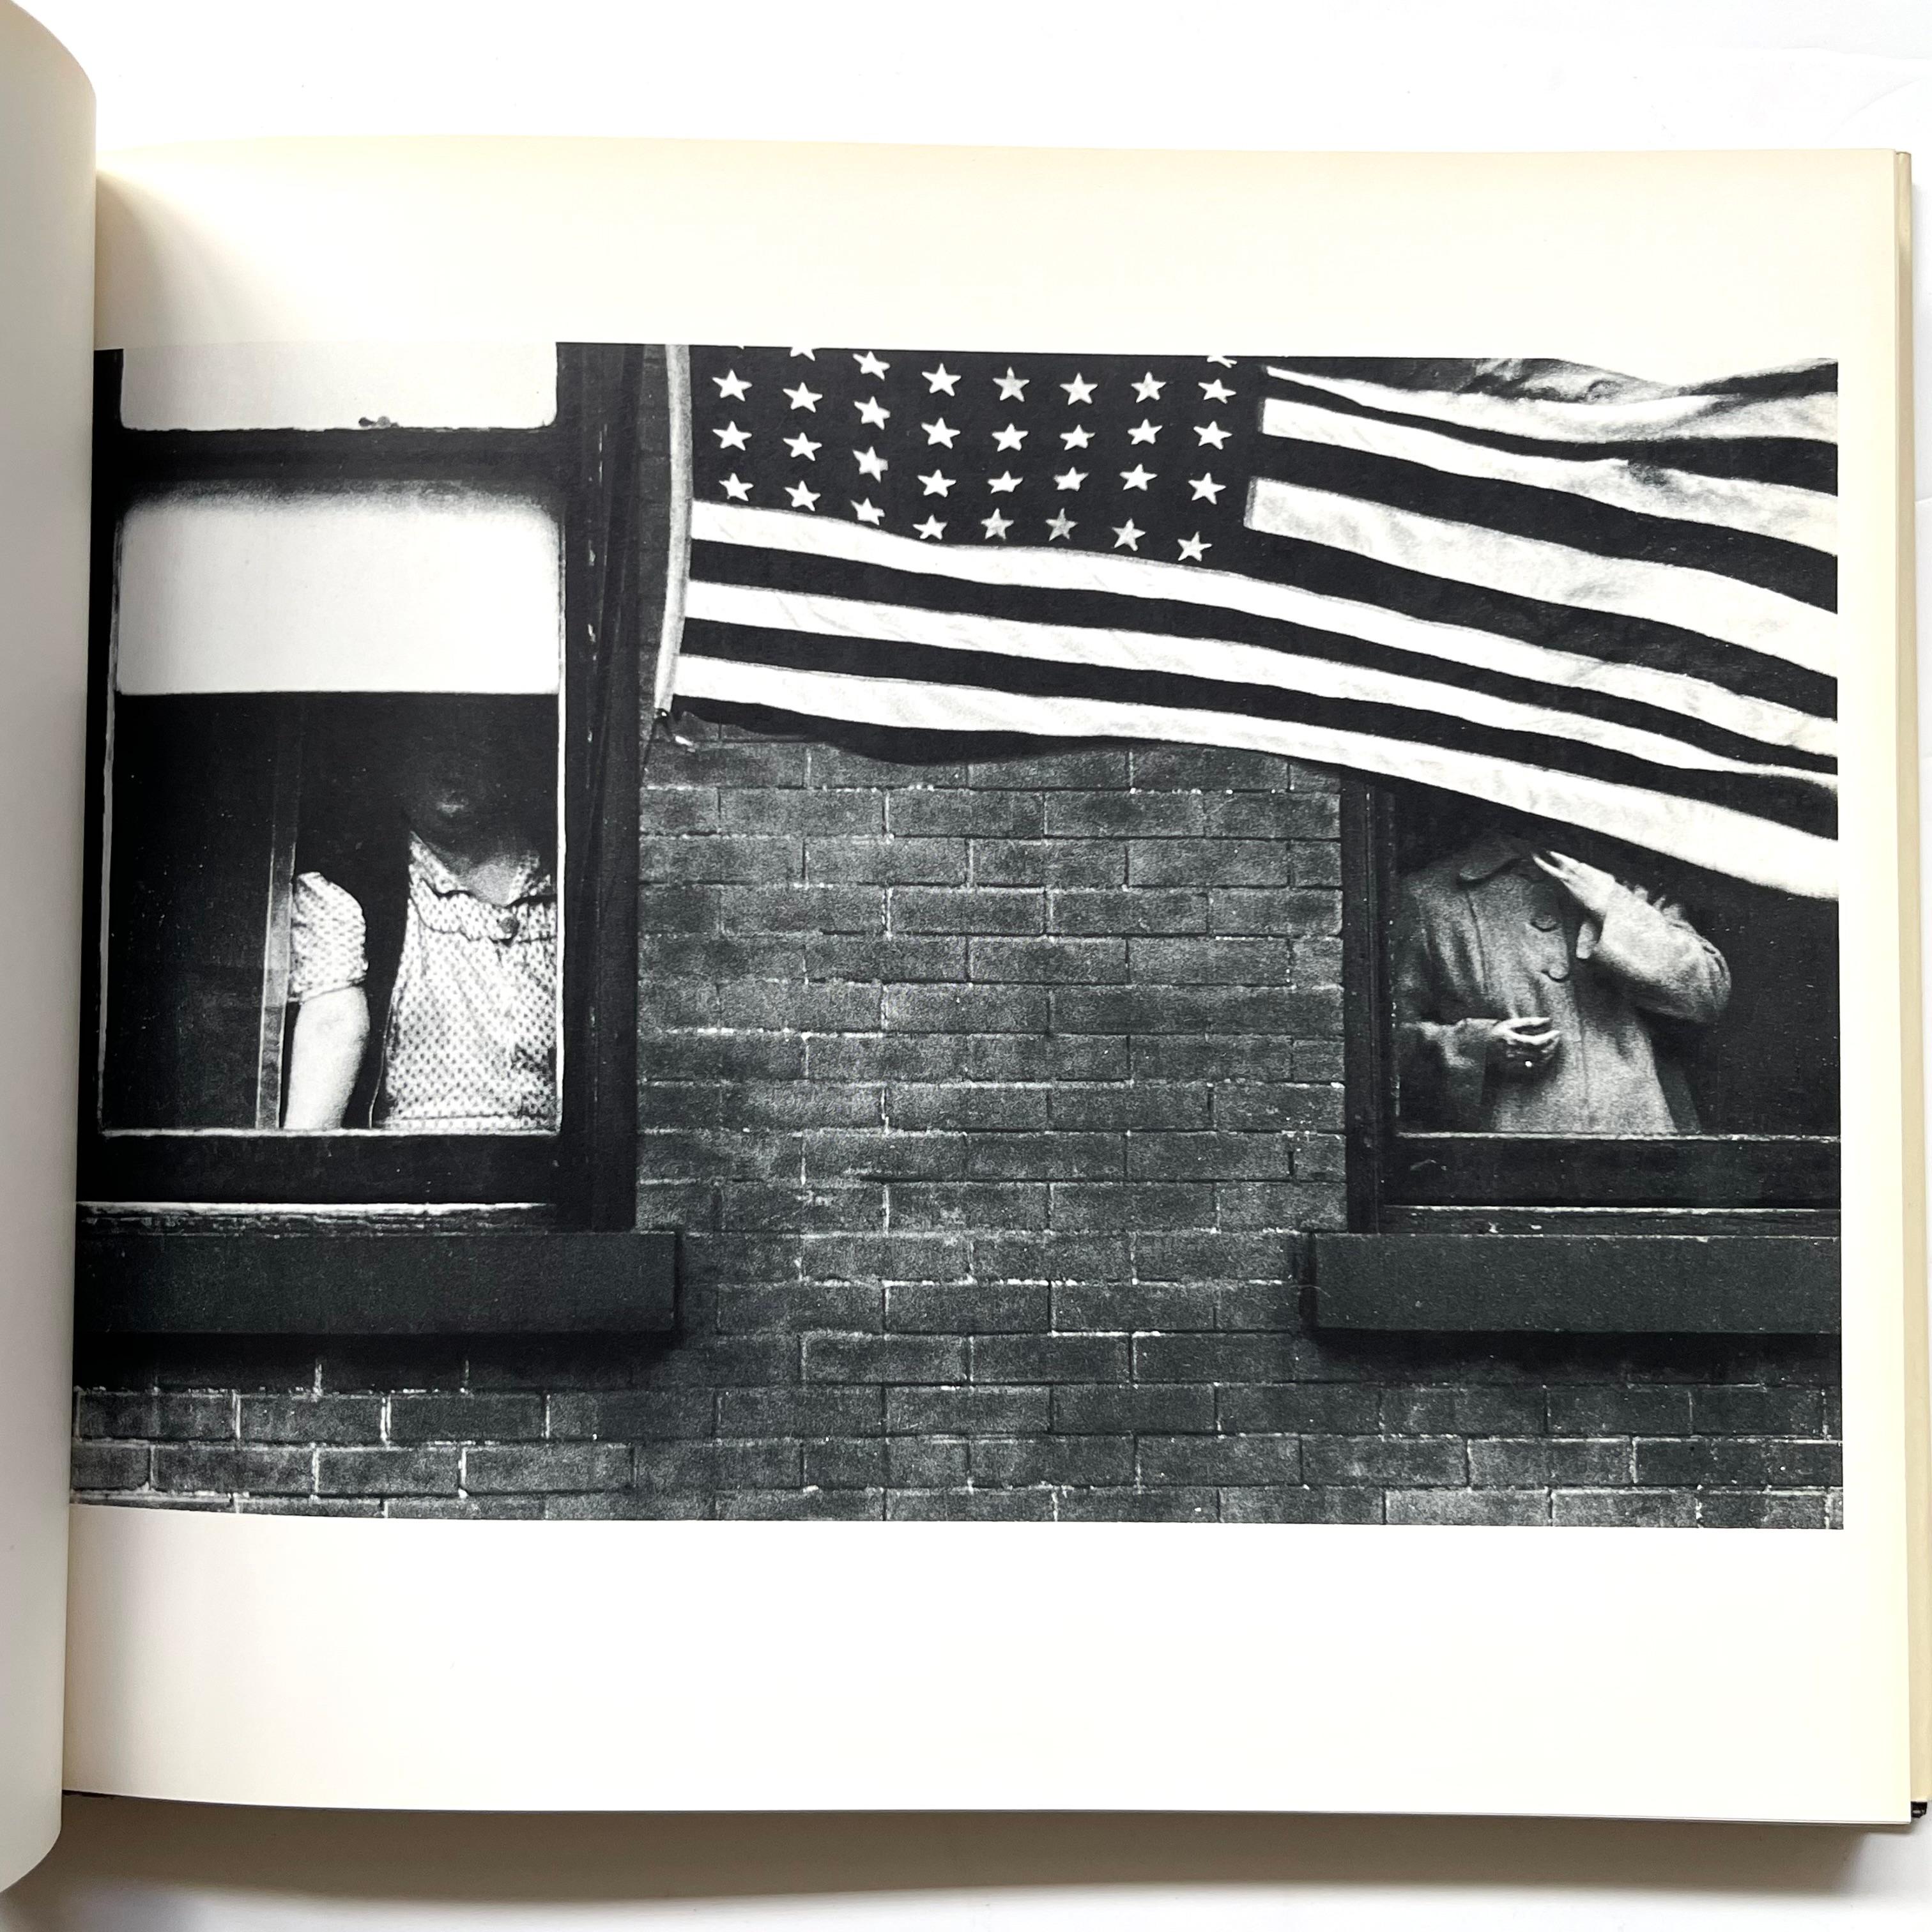 The Americans Robert Frank, Jack Kerouac 1st Enlarged Ed. 1969 For Sale 3